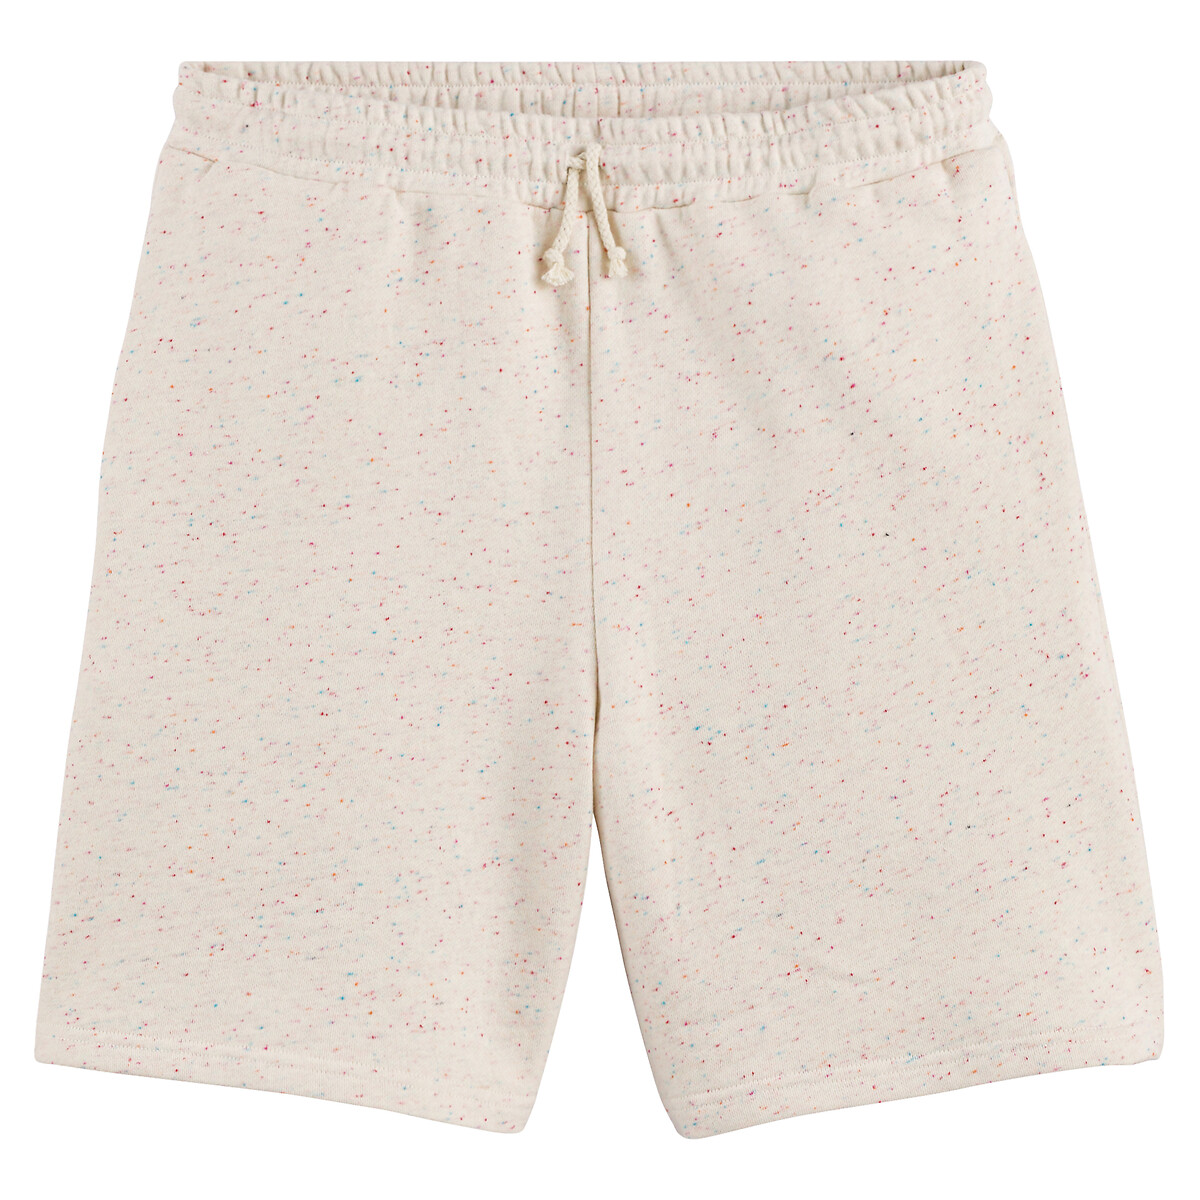 BAND OF SISTERS X LA REDOUTE Short